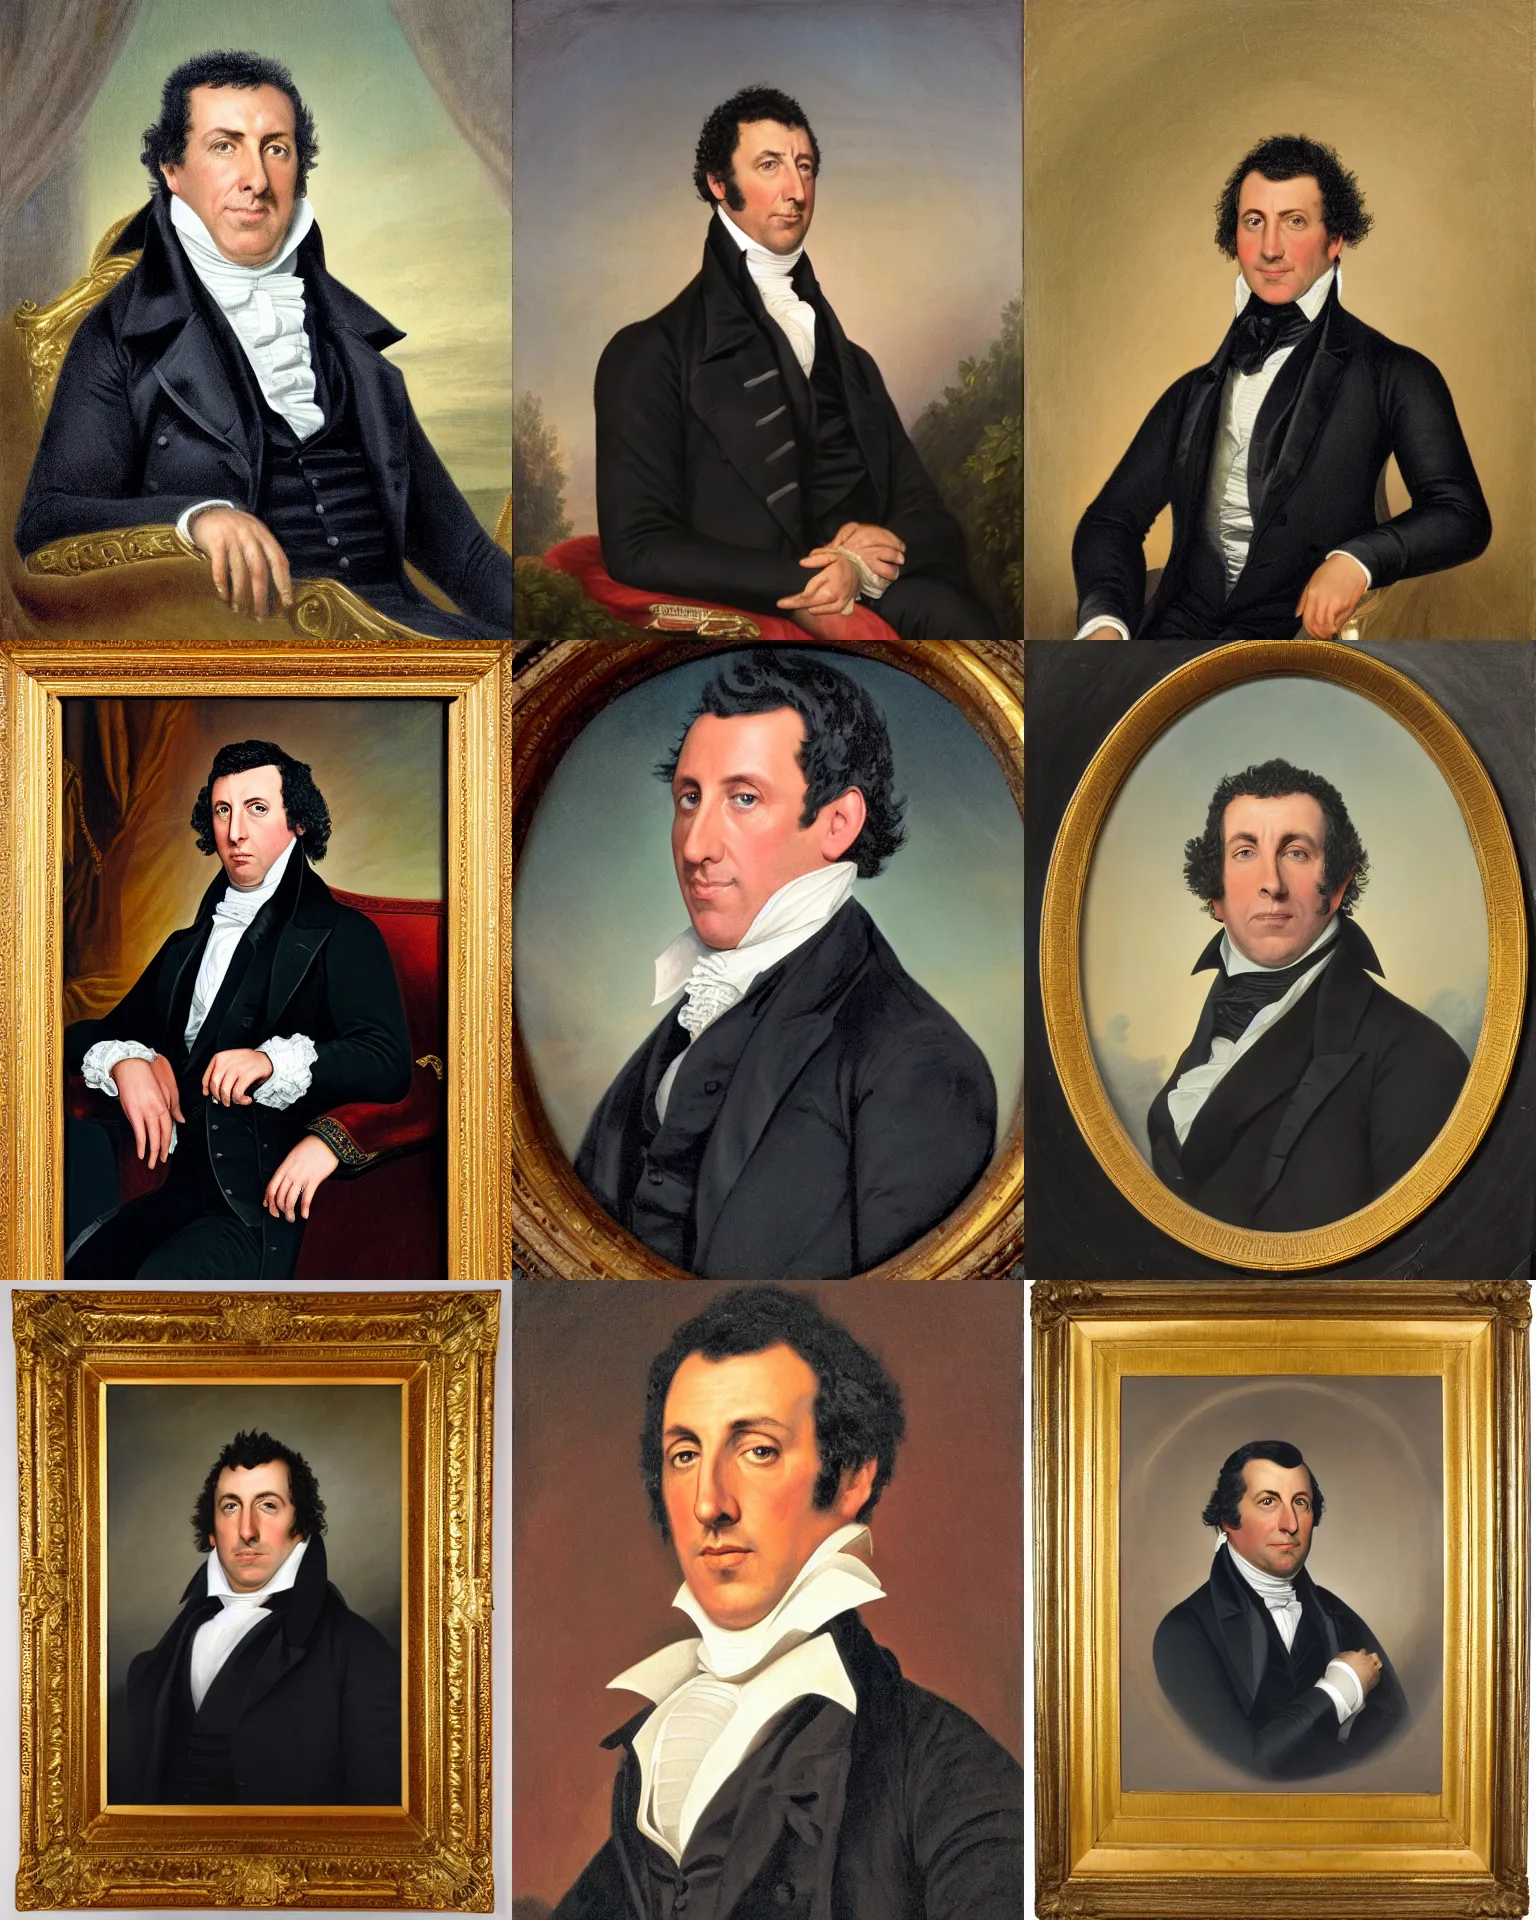 Prompt: Donny Berger Adam Sandler, 6th President of the United States, 1825-1829, Portrait by George Peter Alexander Healy in 1858. Oil on canvas, 62 x 47 inches, White House Collection/White House Historical Association